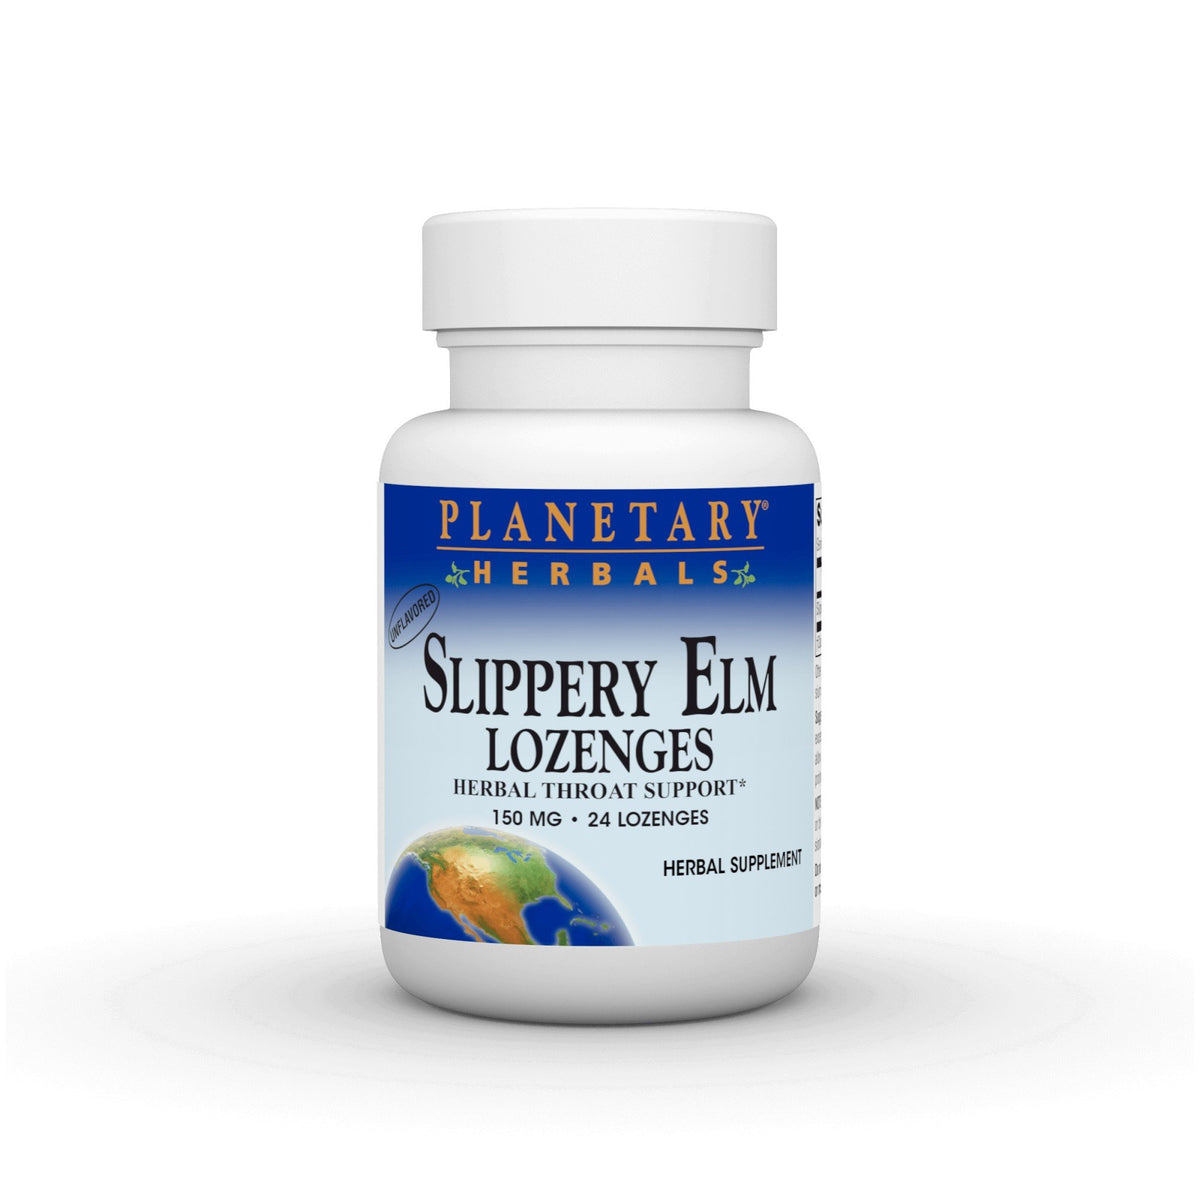 Planetary Herbals Slippery Elm Lozenges Unflavored 24 Tablet